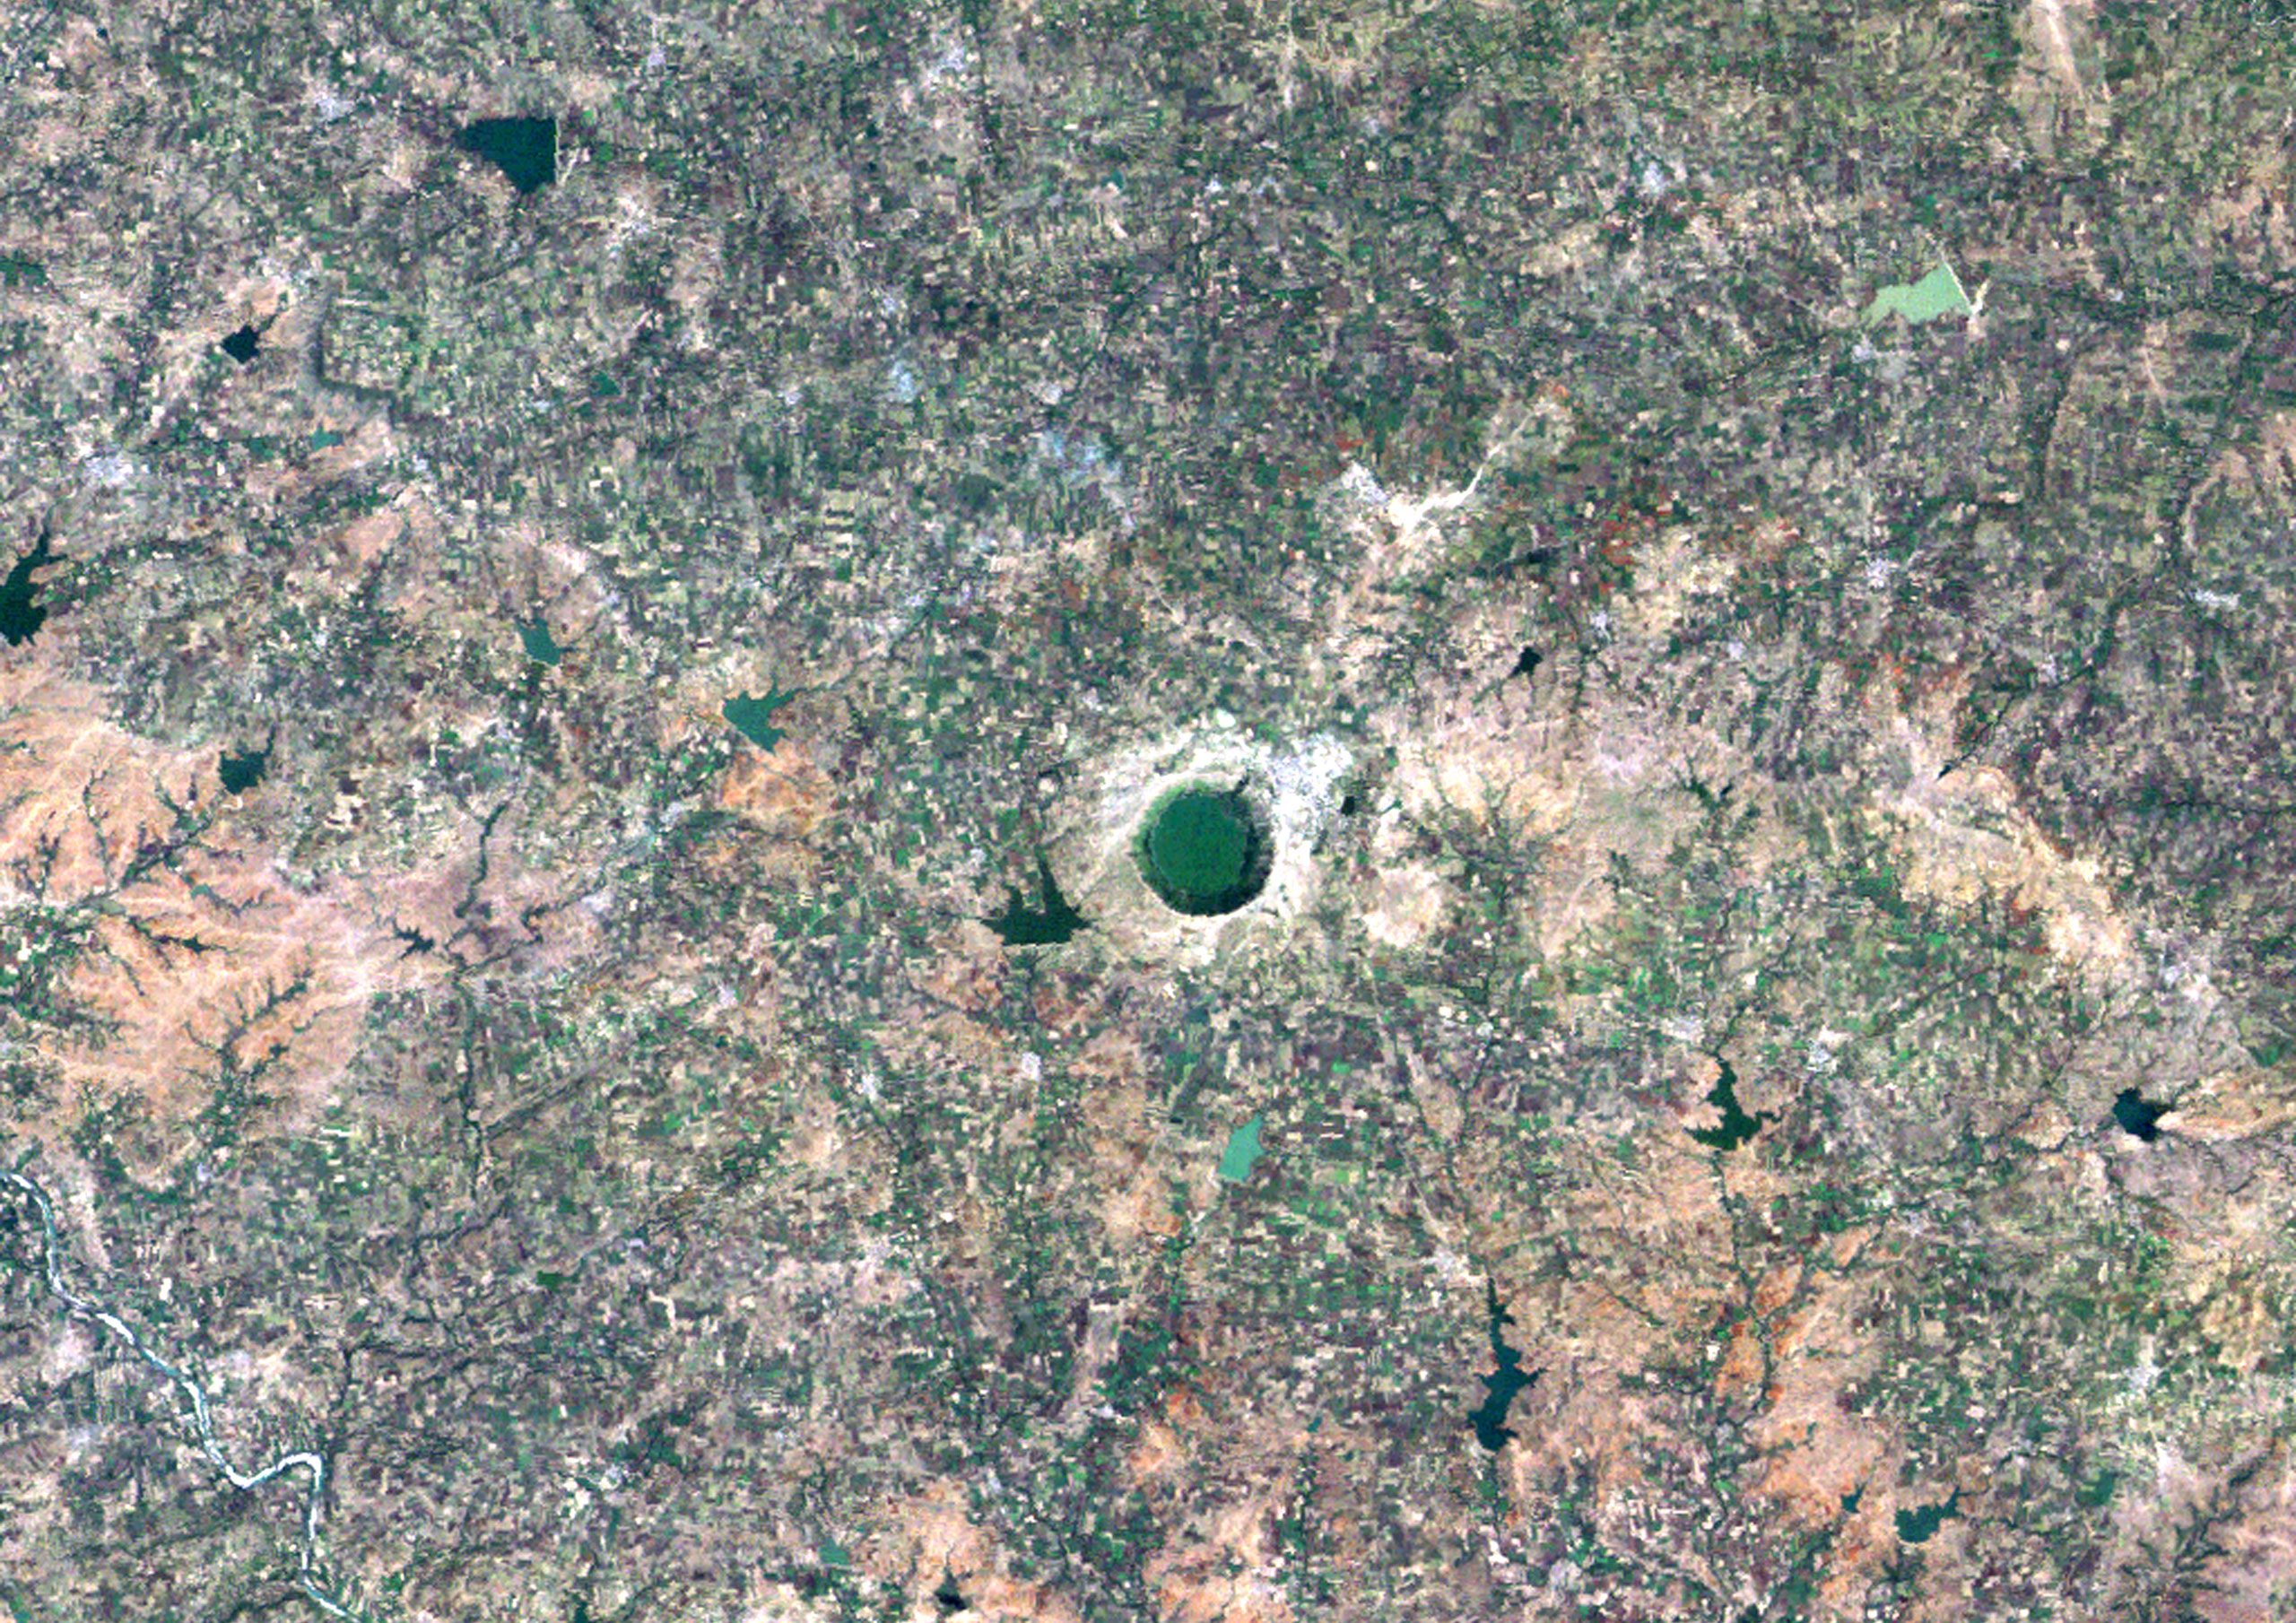 The Lonar impact structure in India. It has a diameter of 1.83 km.